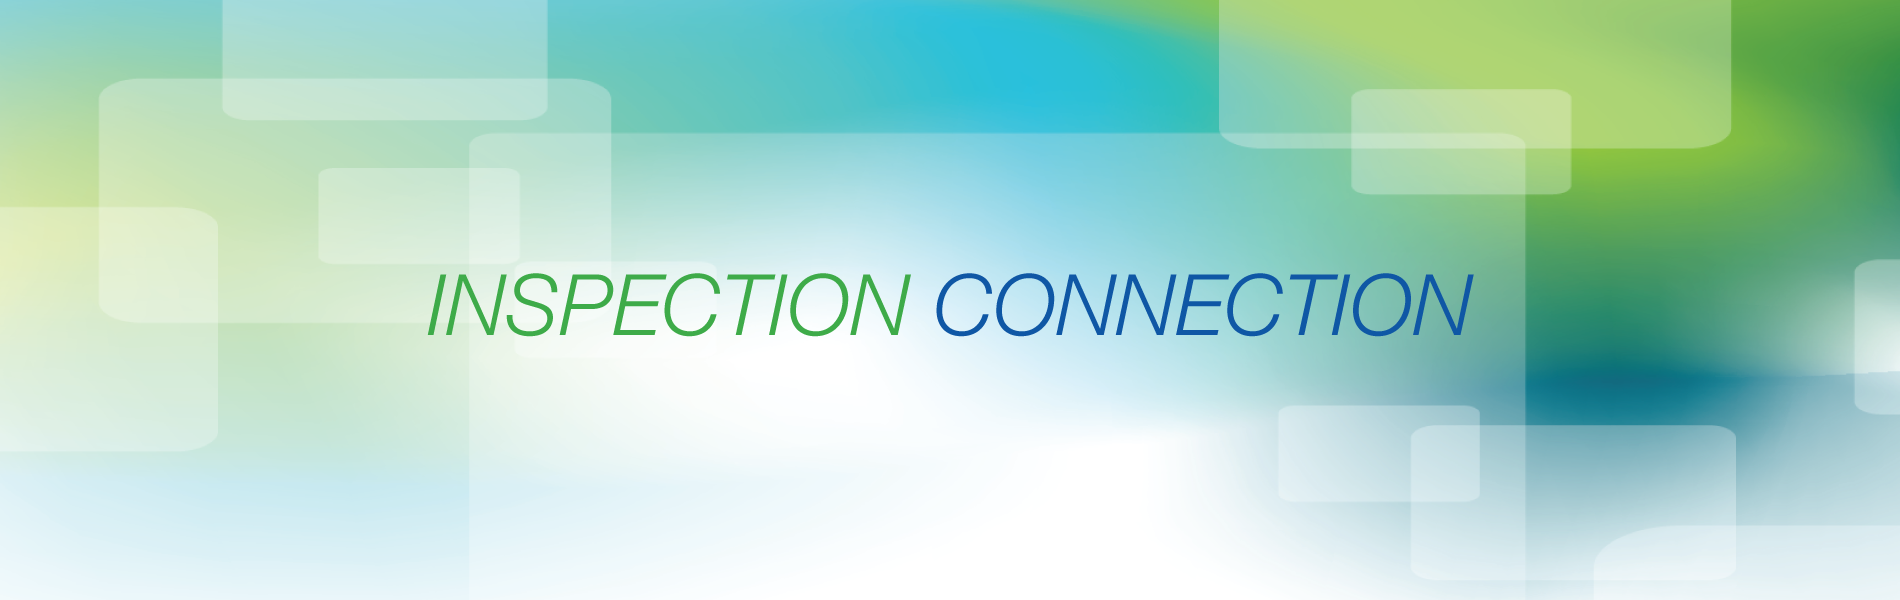 Inspection Connection Banner image